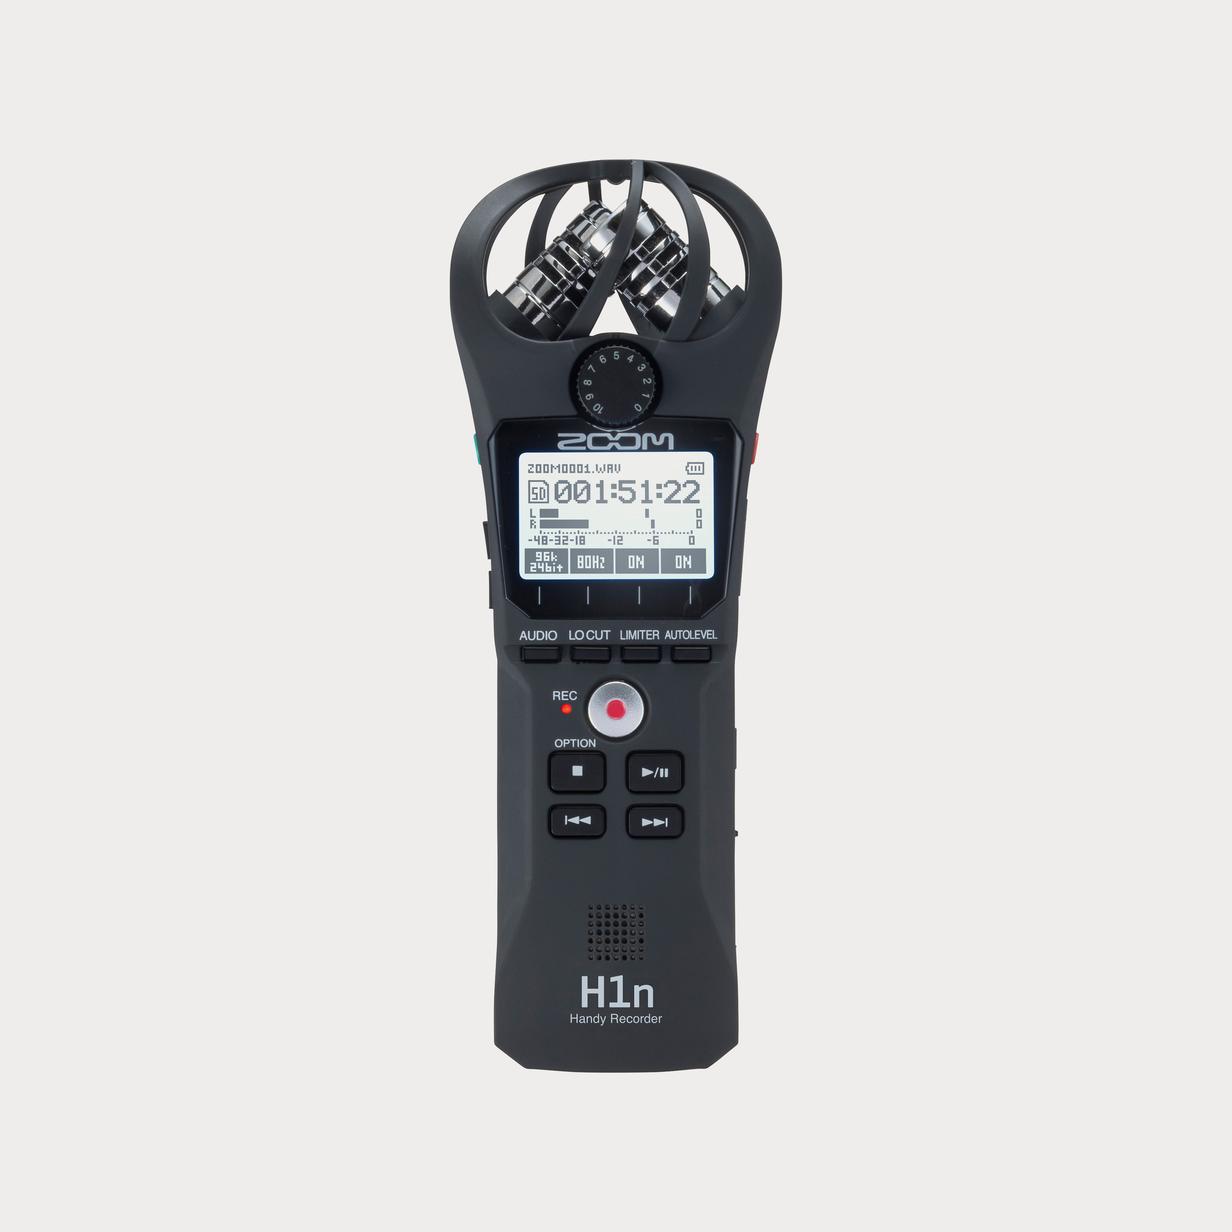 Moment zoom ZH1 N H1n Handy Recorder 01